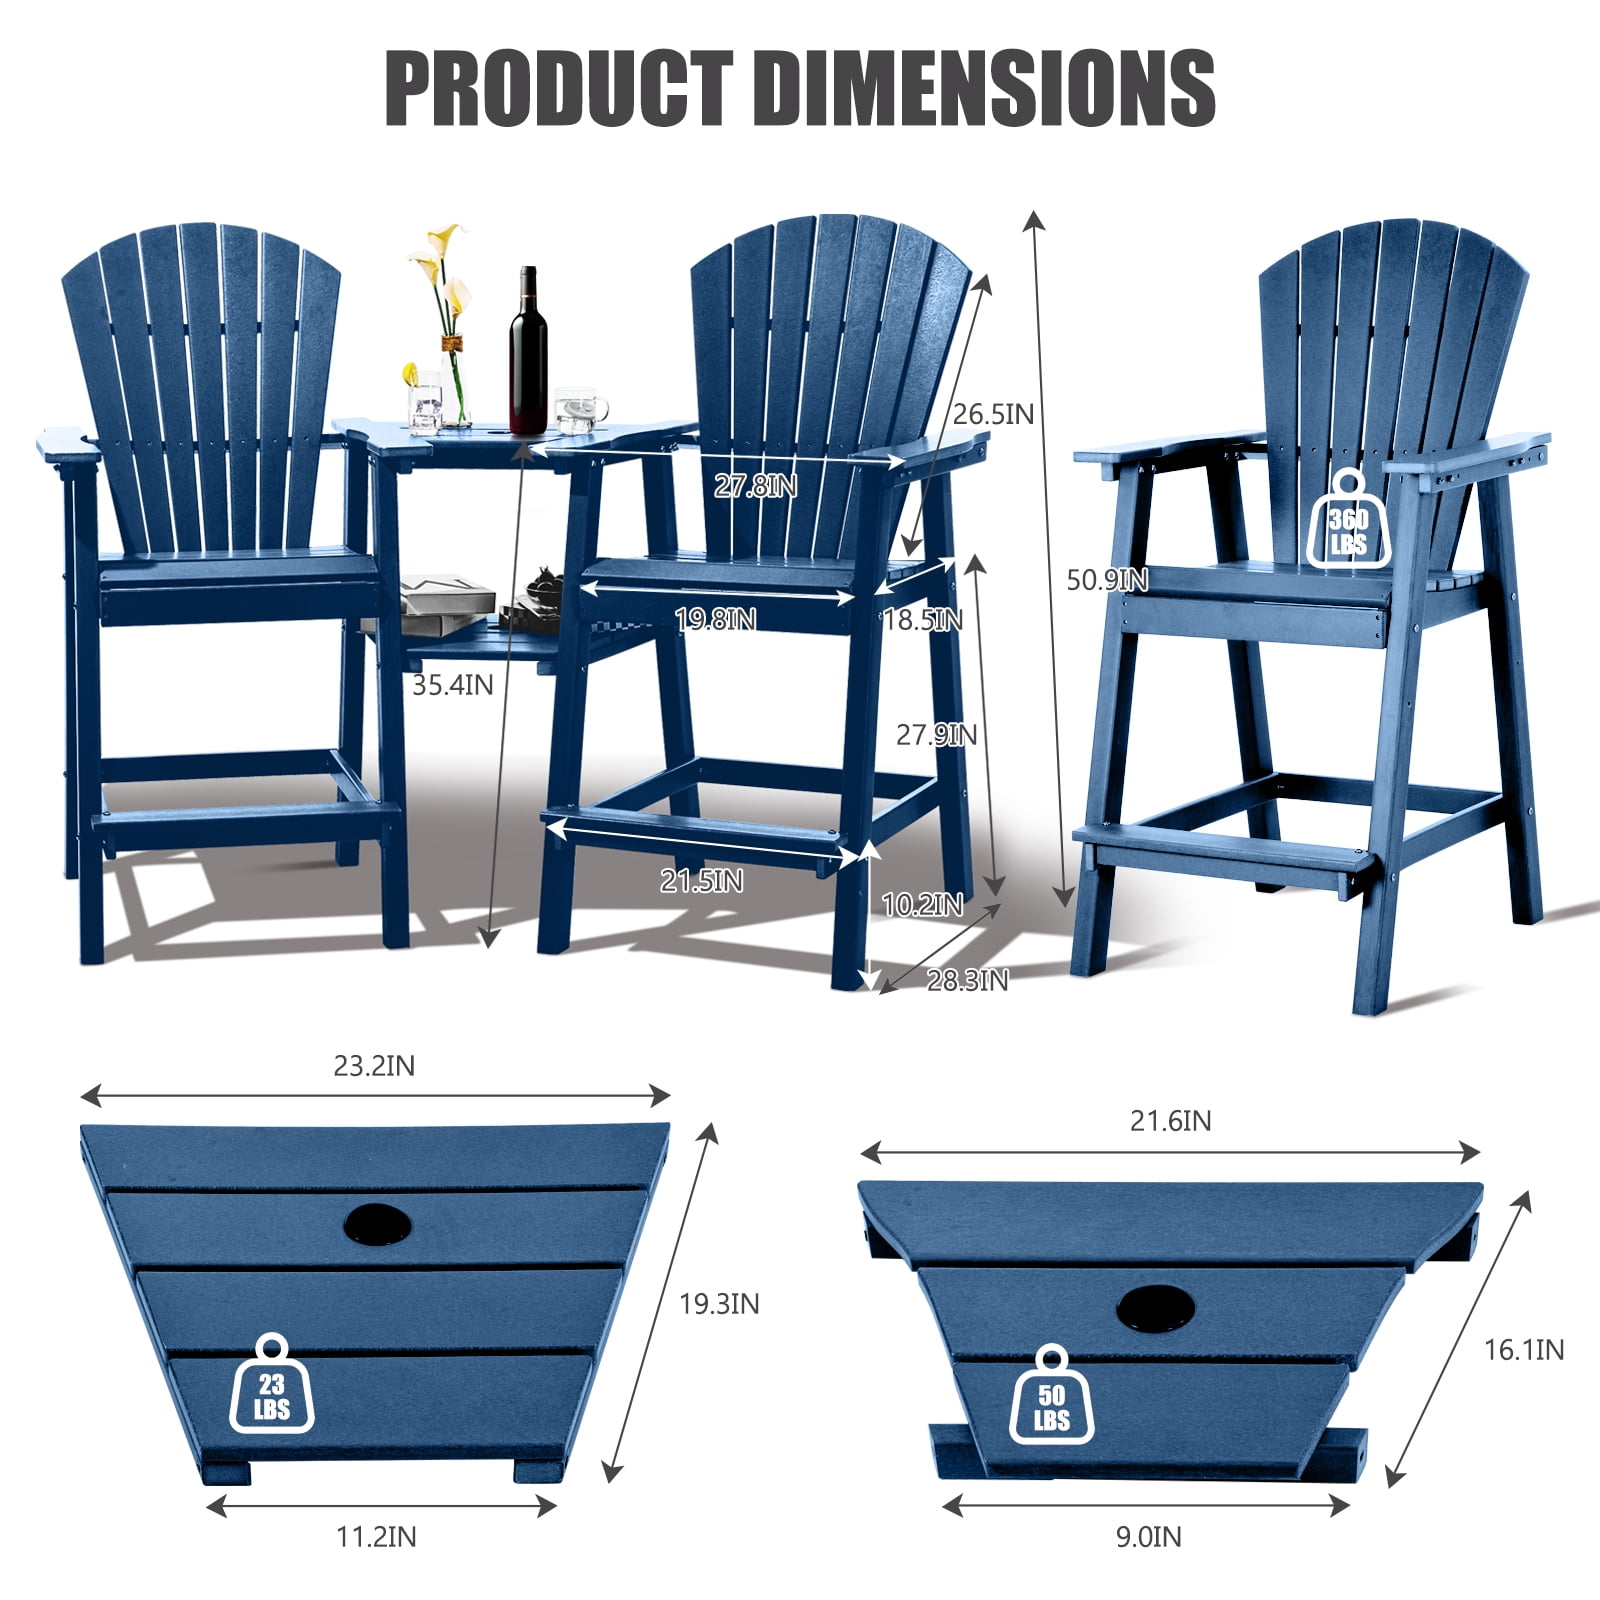 Tall Adirondack Chairs Set of 2，Outdoor Adirondack Barstools with Double Connecting Tray Patio Stools Weather Resistant for Outdoor Deck Lawn Pool Backyard,Grey